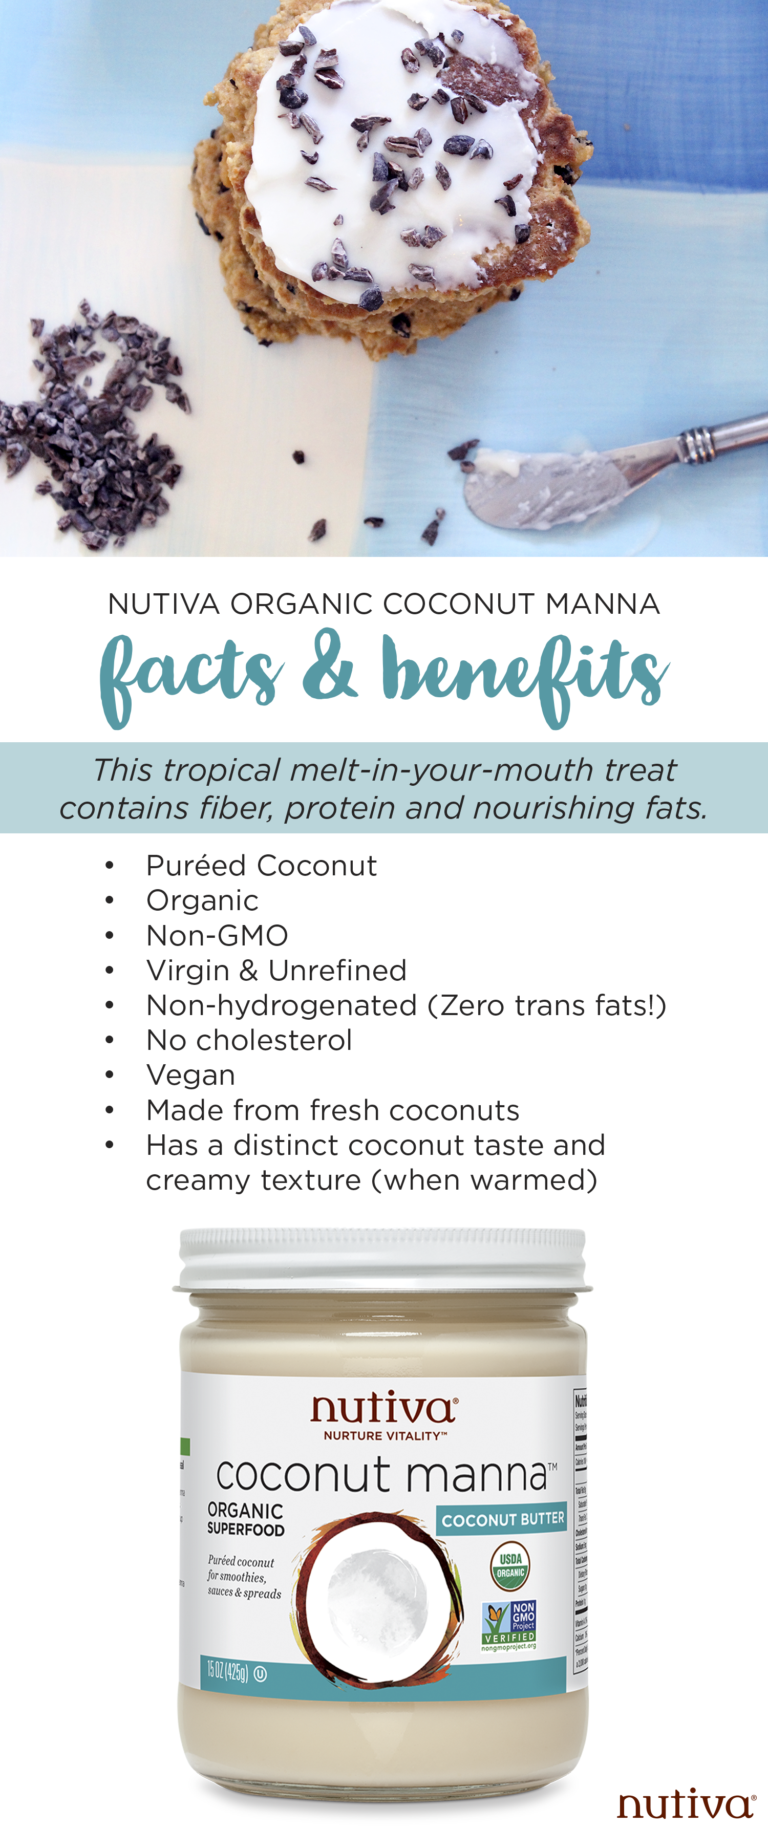 Your-Complete-Guide-to-Coconut-Manna-kitchen.nutiva.com-Organic-768x1829